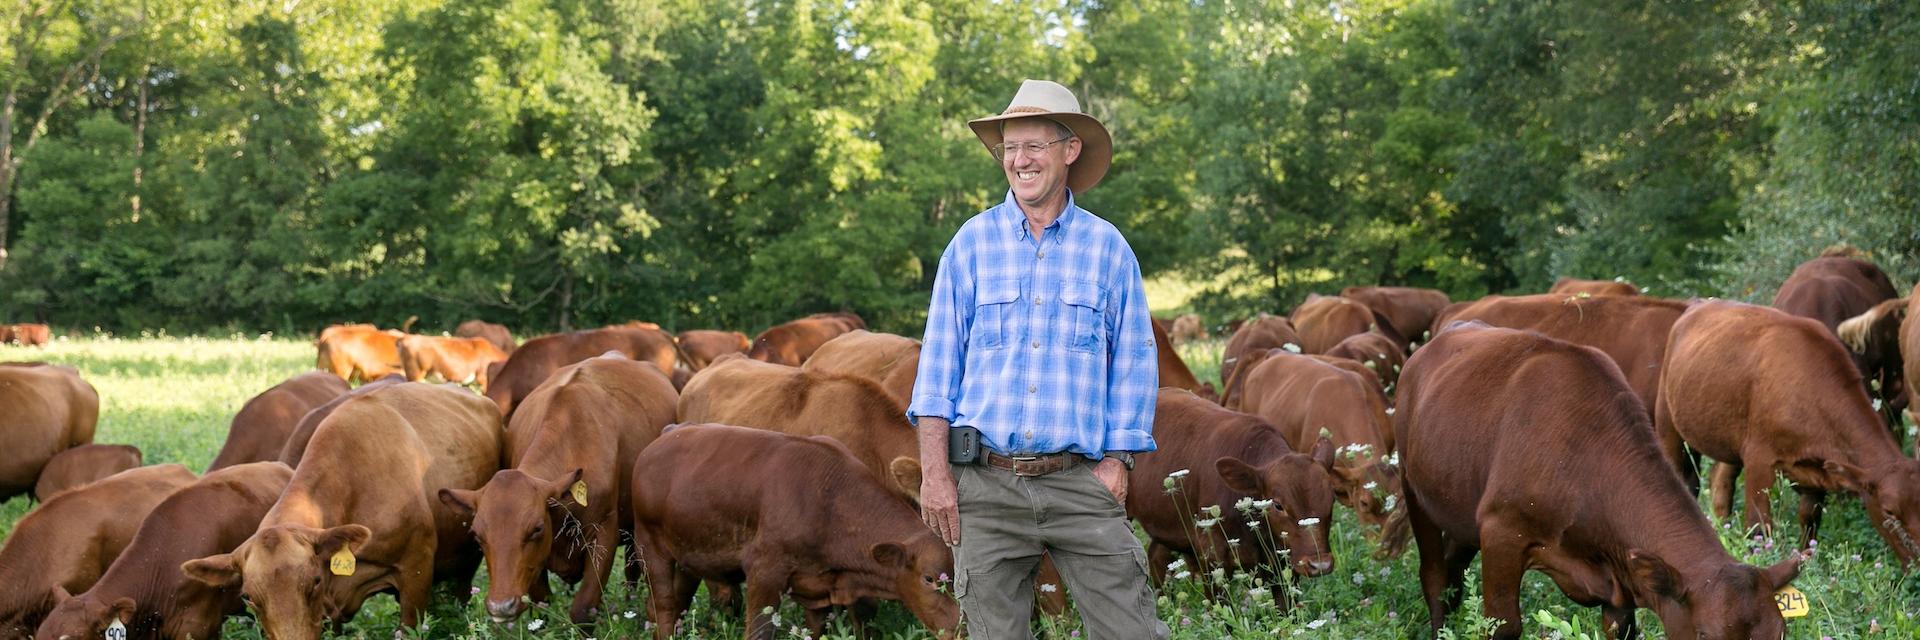 Regenerative rancher Greg Judy smiling with his cattle on pasture.